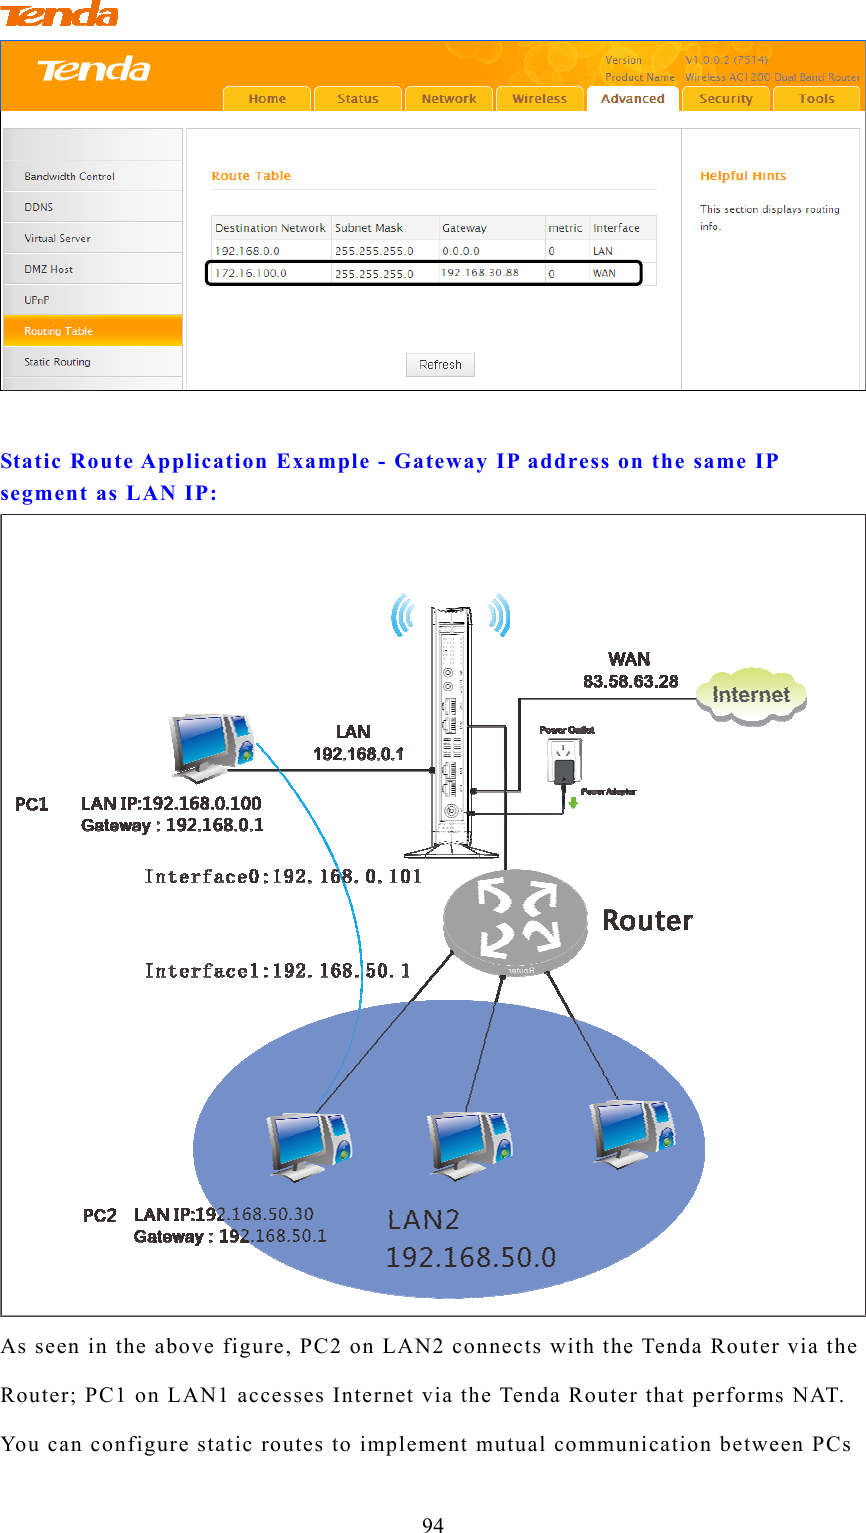                                         94  Static Route Application Example - Gateway IP address on the same IP segment as LAN IP:  As seen in the above figure, PC2 on LAN2 connects with the Tenda Router via the Router; PC1 on LAN1 accesses Internet via the Tenda Router that performs NAT. You can configure static routes to implement mutual communication between PCs 